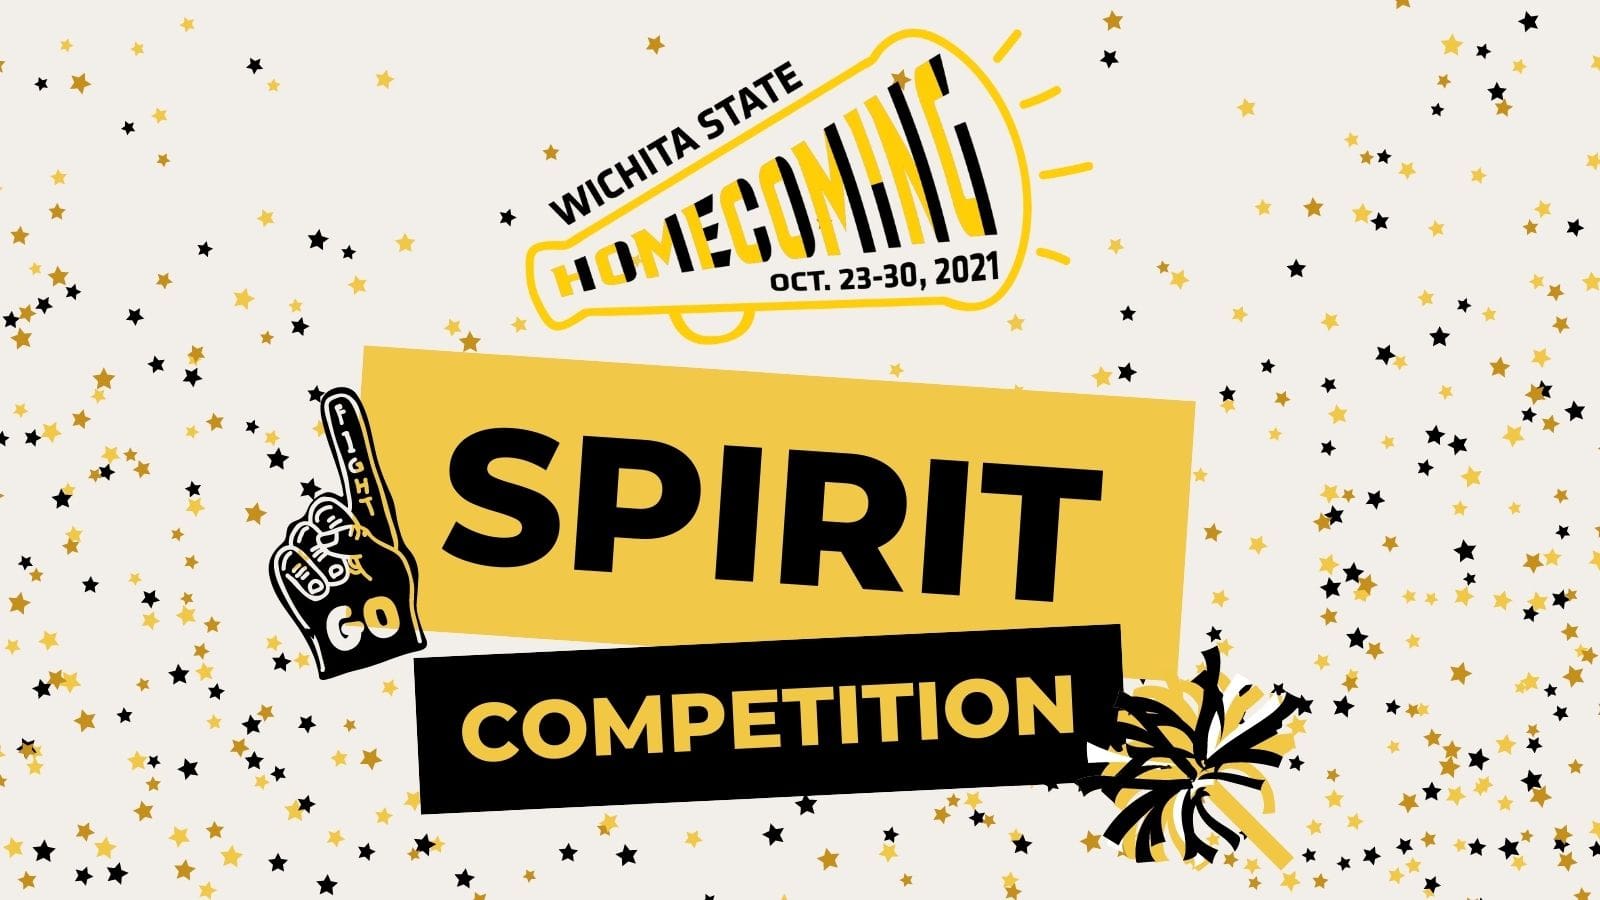 Graphic featuring text 'Wichita State Homecoming Oct. 23-30, 2021-Go Fight-Spirit Competition.'